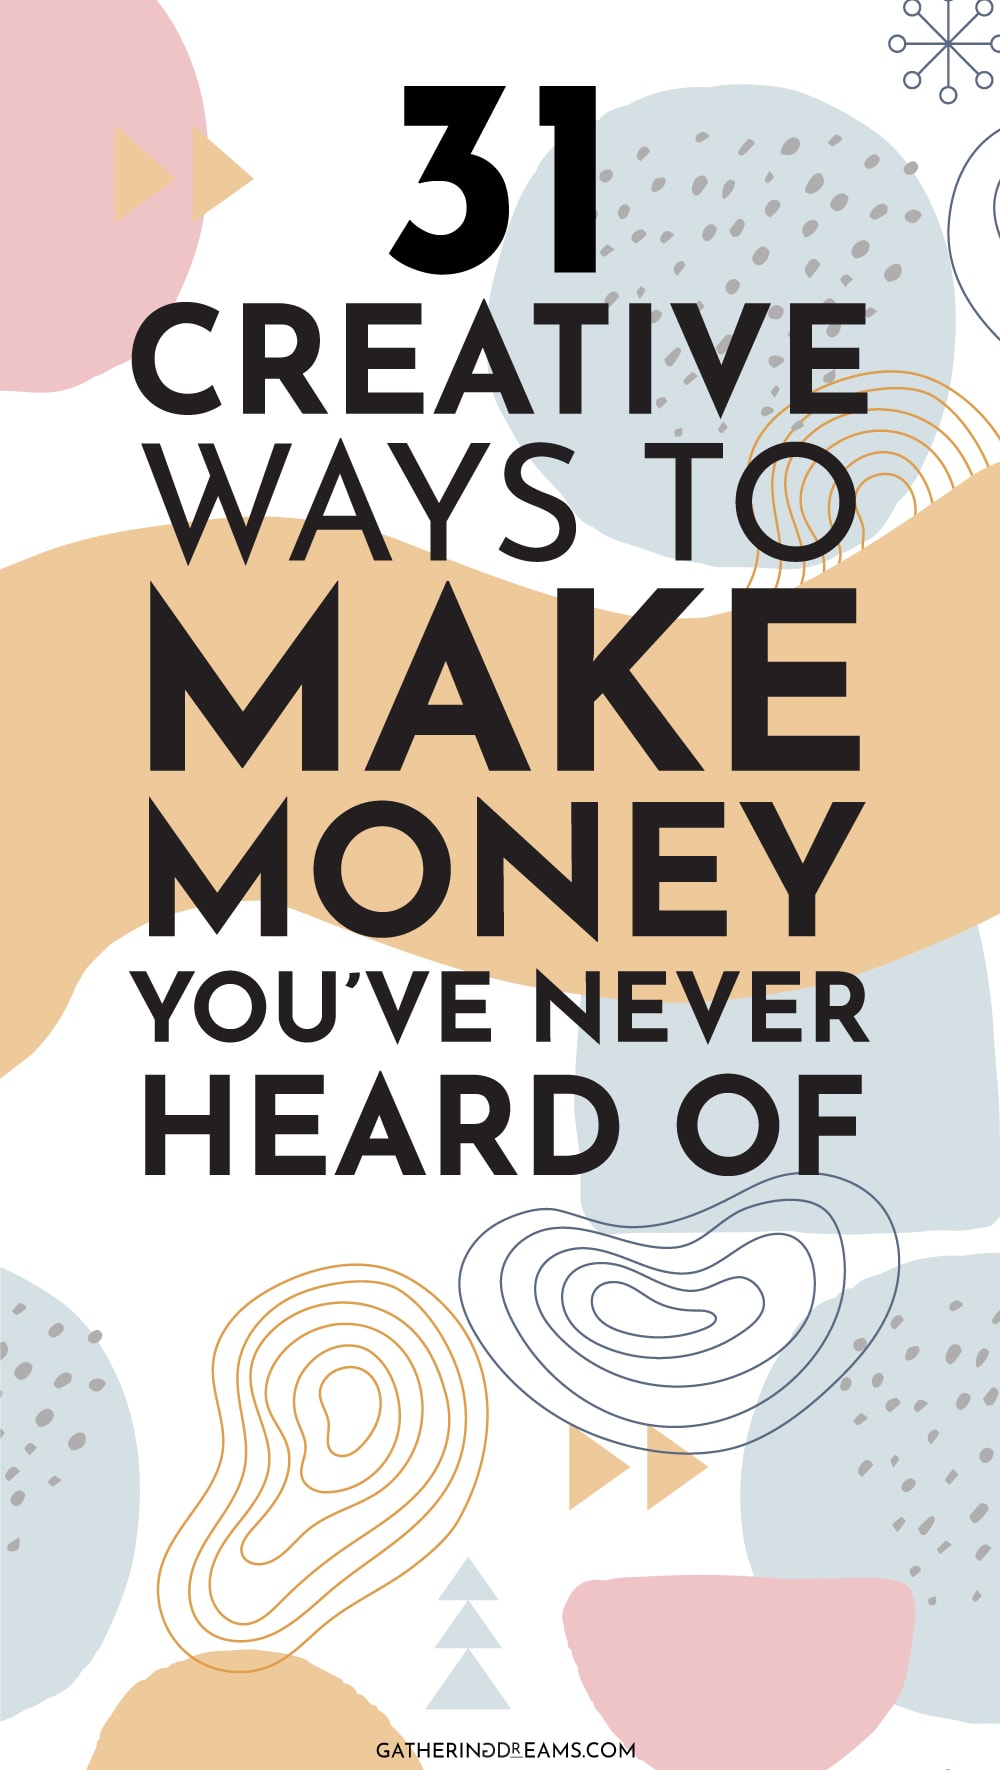 36-creative-ways-to-make-100-a-day-how-to-make-money-fast